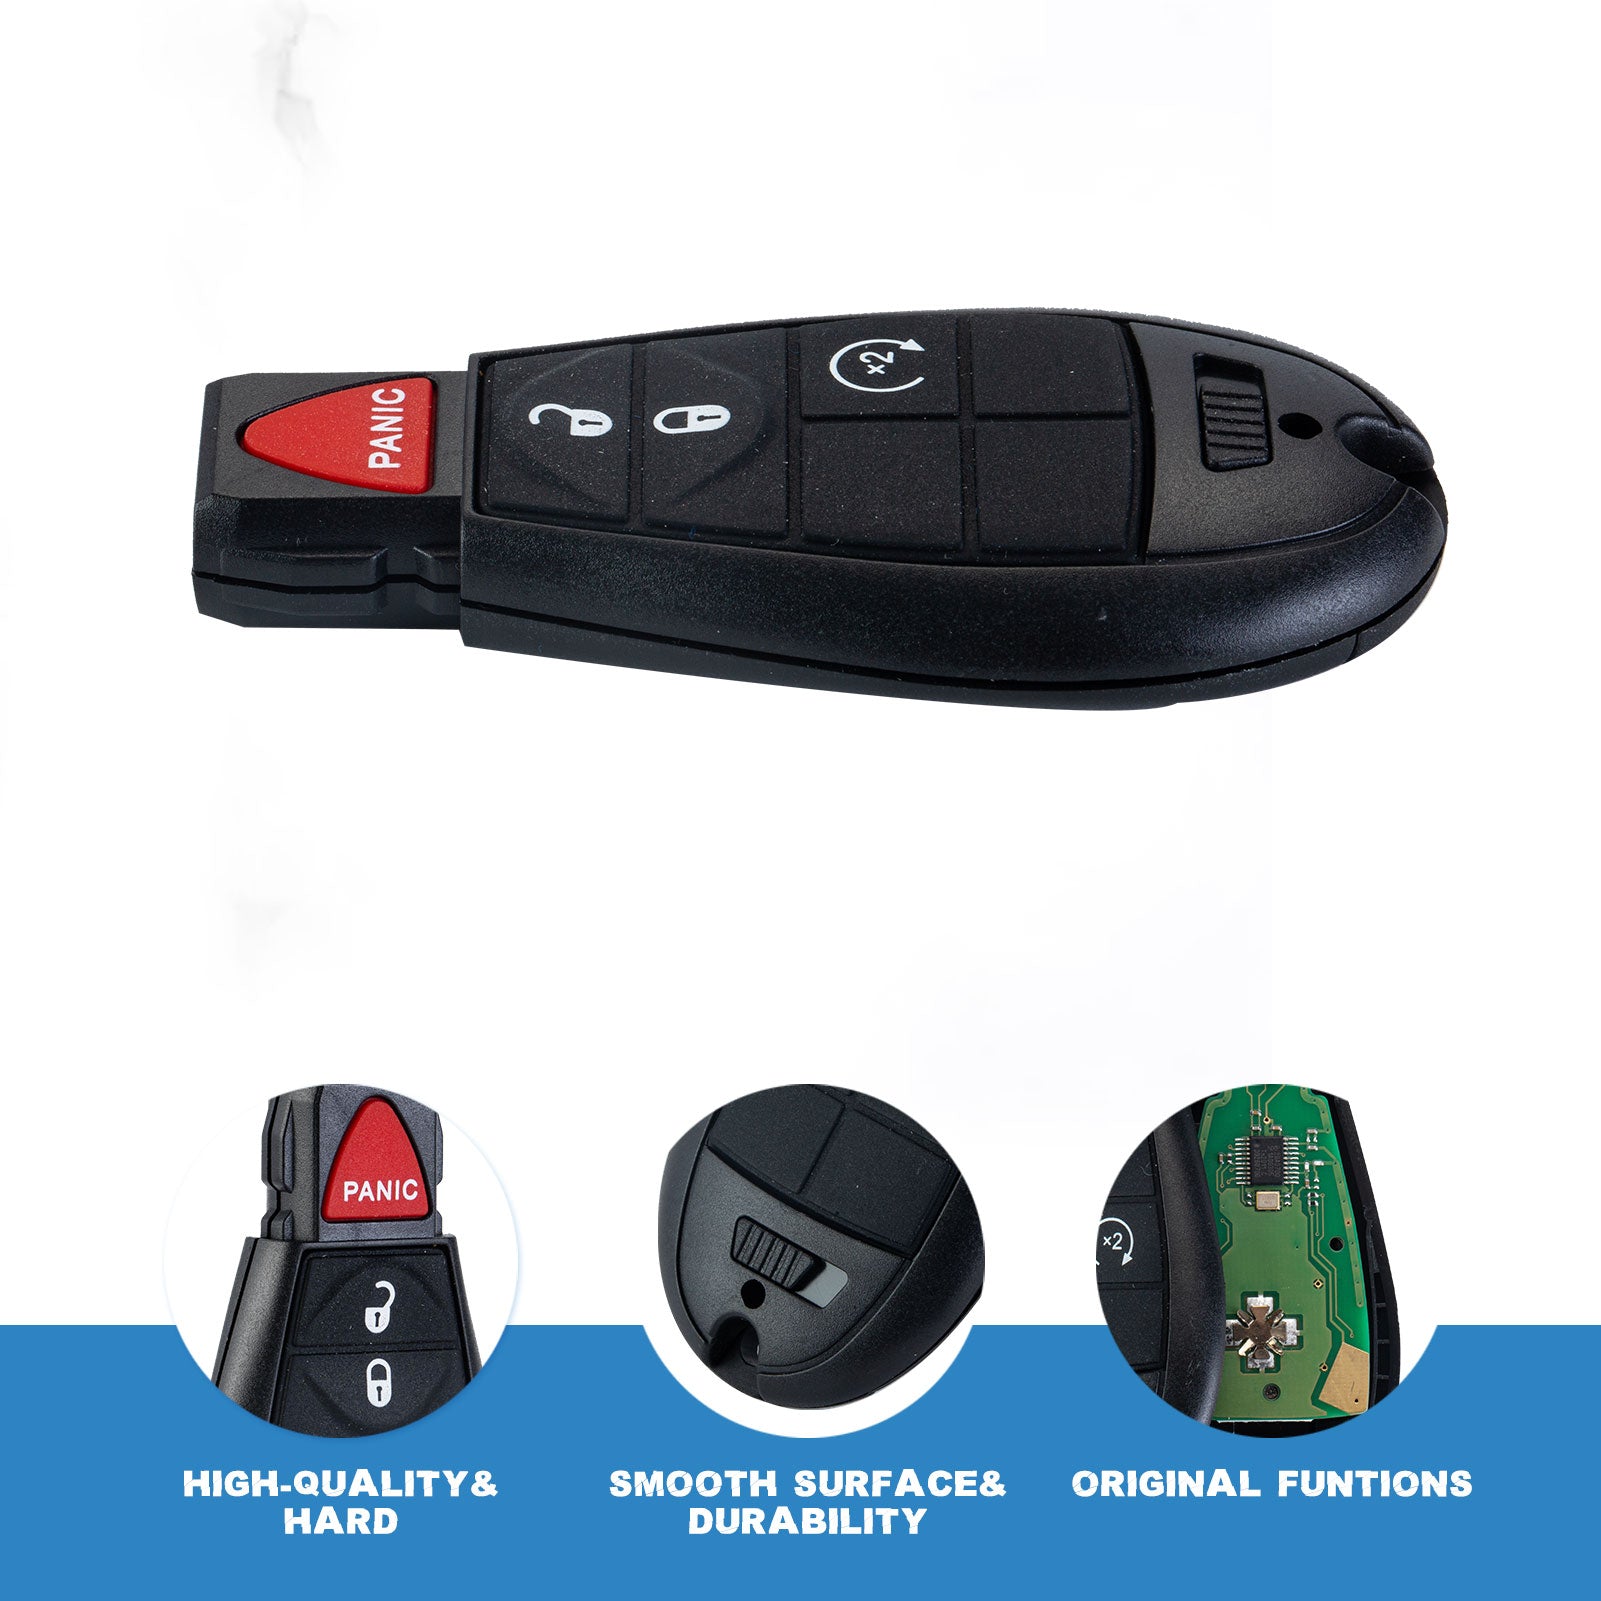 Keyless Entry Car Key Fob Replacement for 2008-2016 Chrysler Town/300, 2009-2012 Volkswagen Routan 433MHZ IYZ-C01C or M3N5WY783X   KR-D4RB